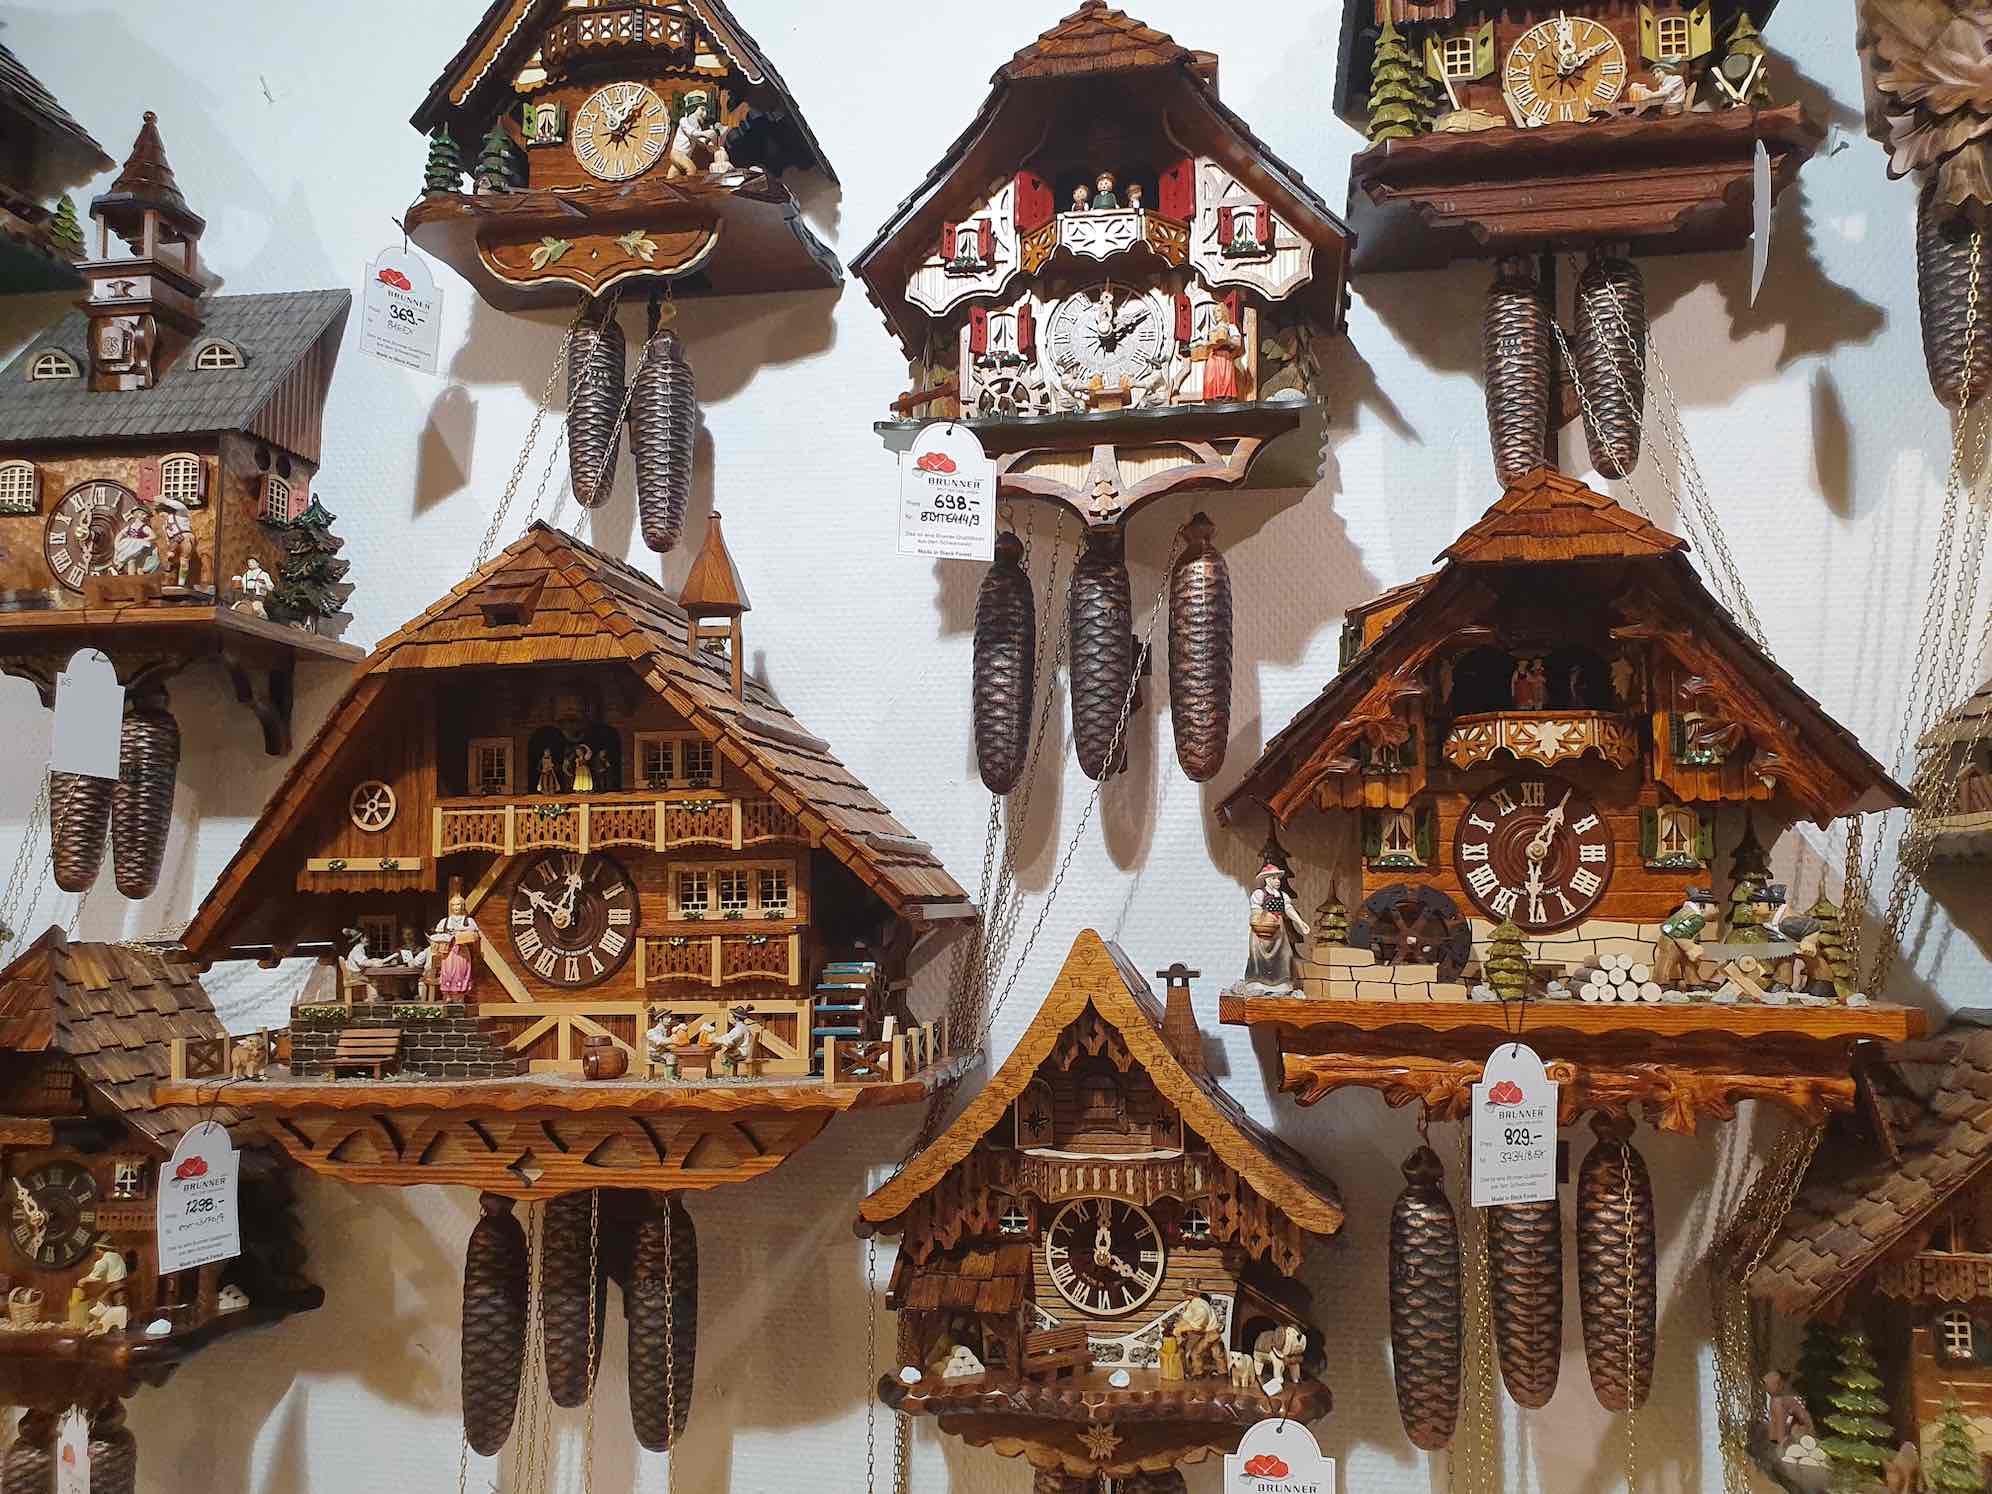 Cuckoo Clocks - Souvenir from the Black Forest ❘ blog by Kiramiga - beyond relocation